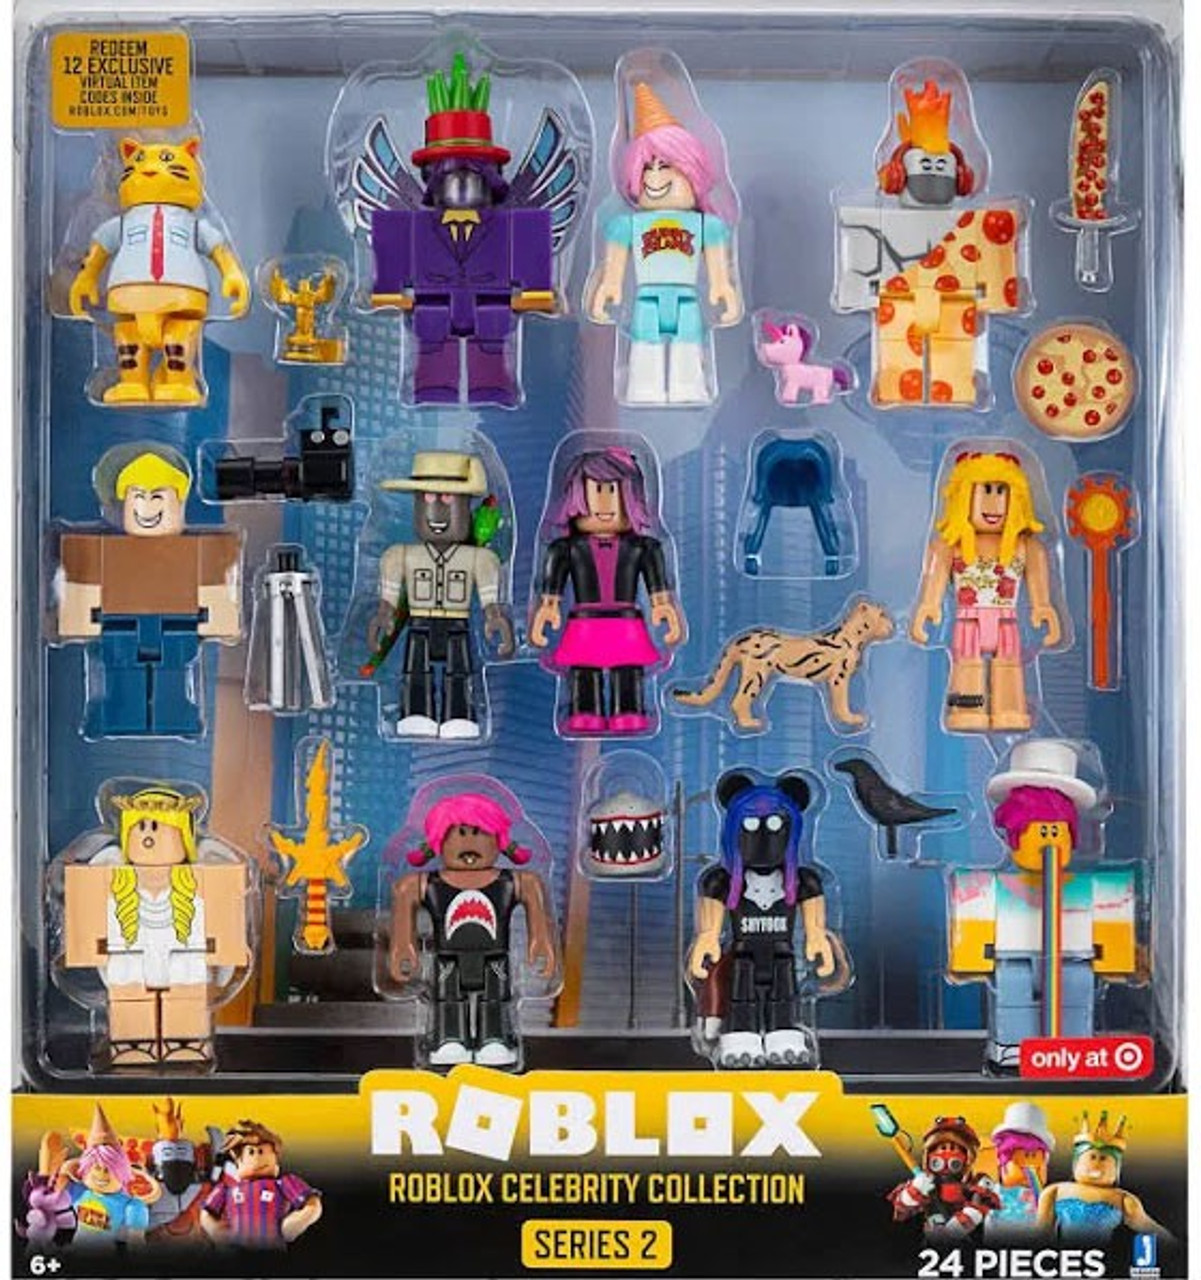 Roblox Series 2 Celebrity Collection Exclusive Action Figure 12 Pack Damaged Package - roblox celebrity series 2